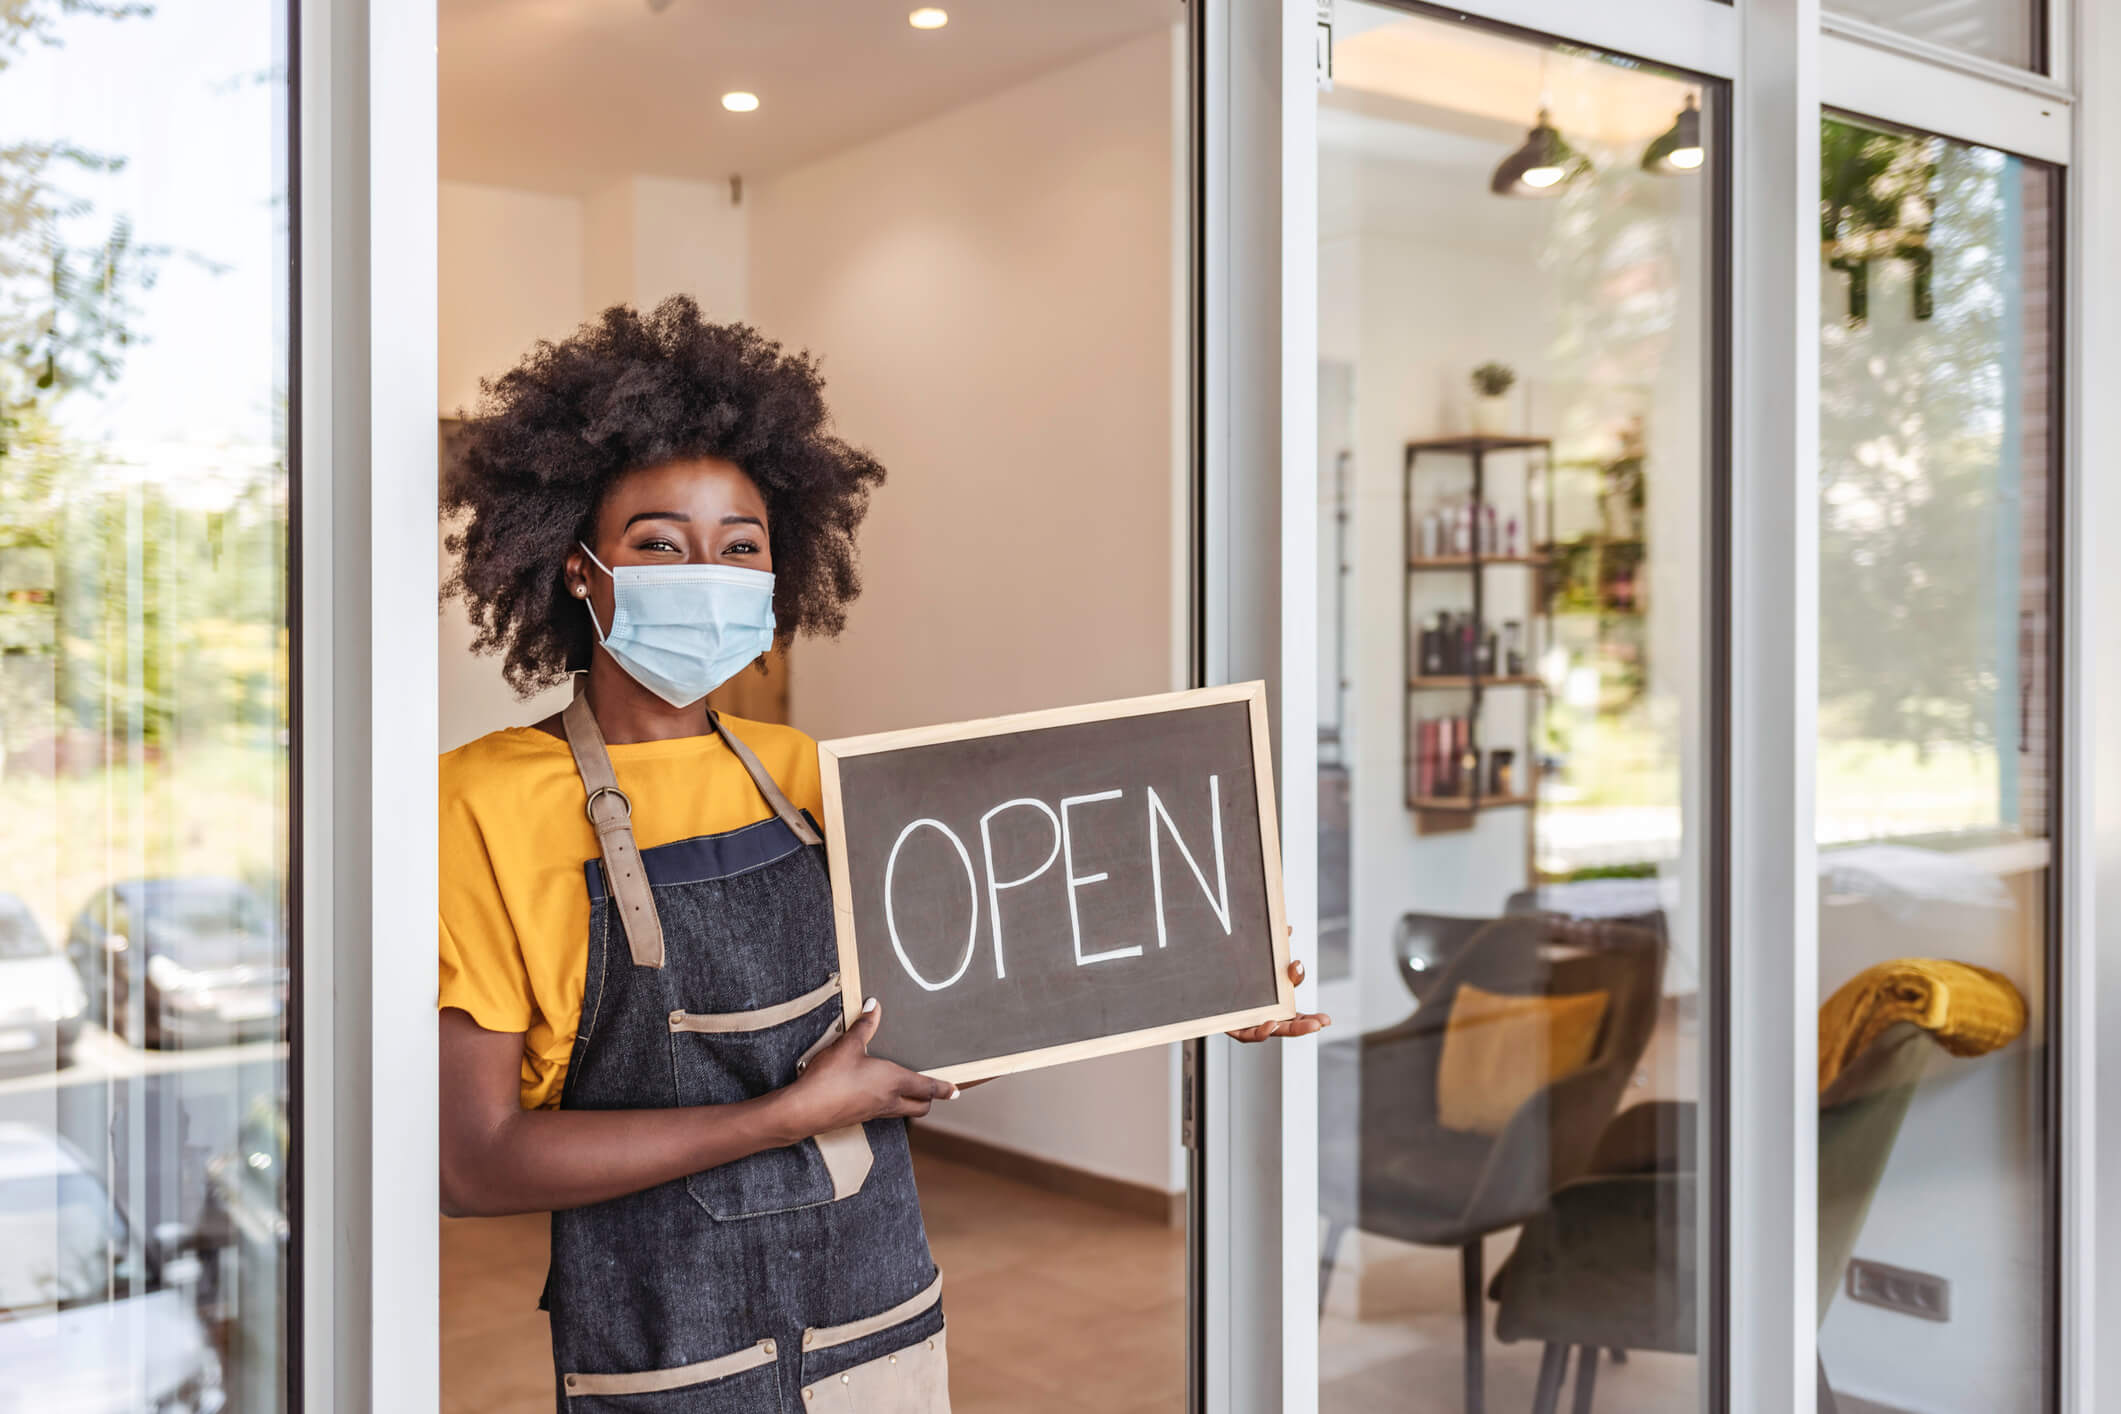 Girl With a Mask On Holding an Open Sign Storefront